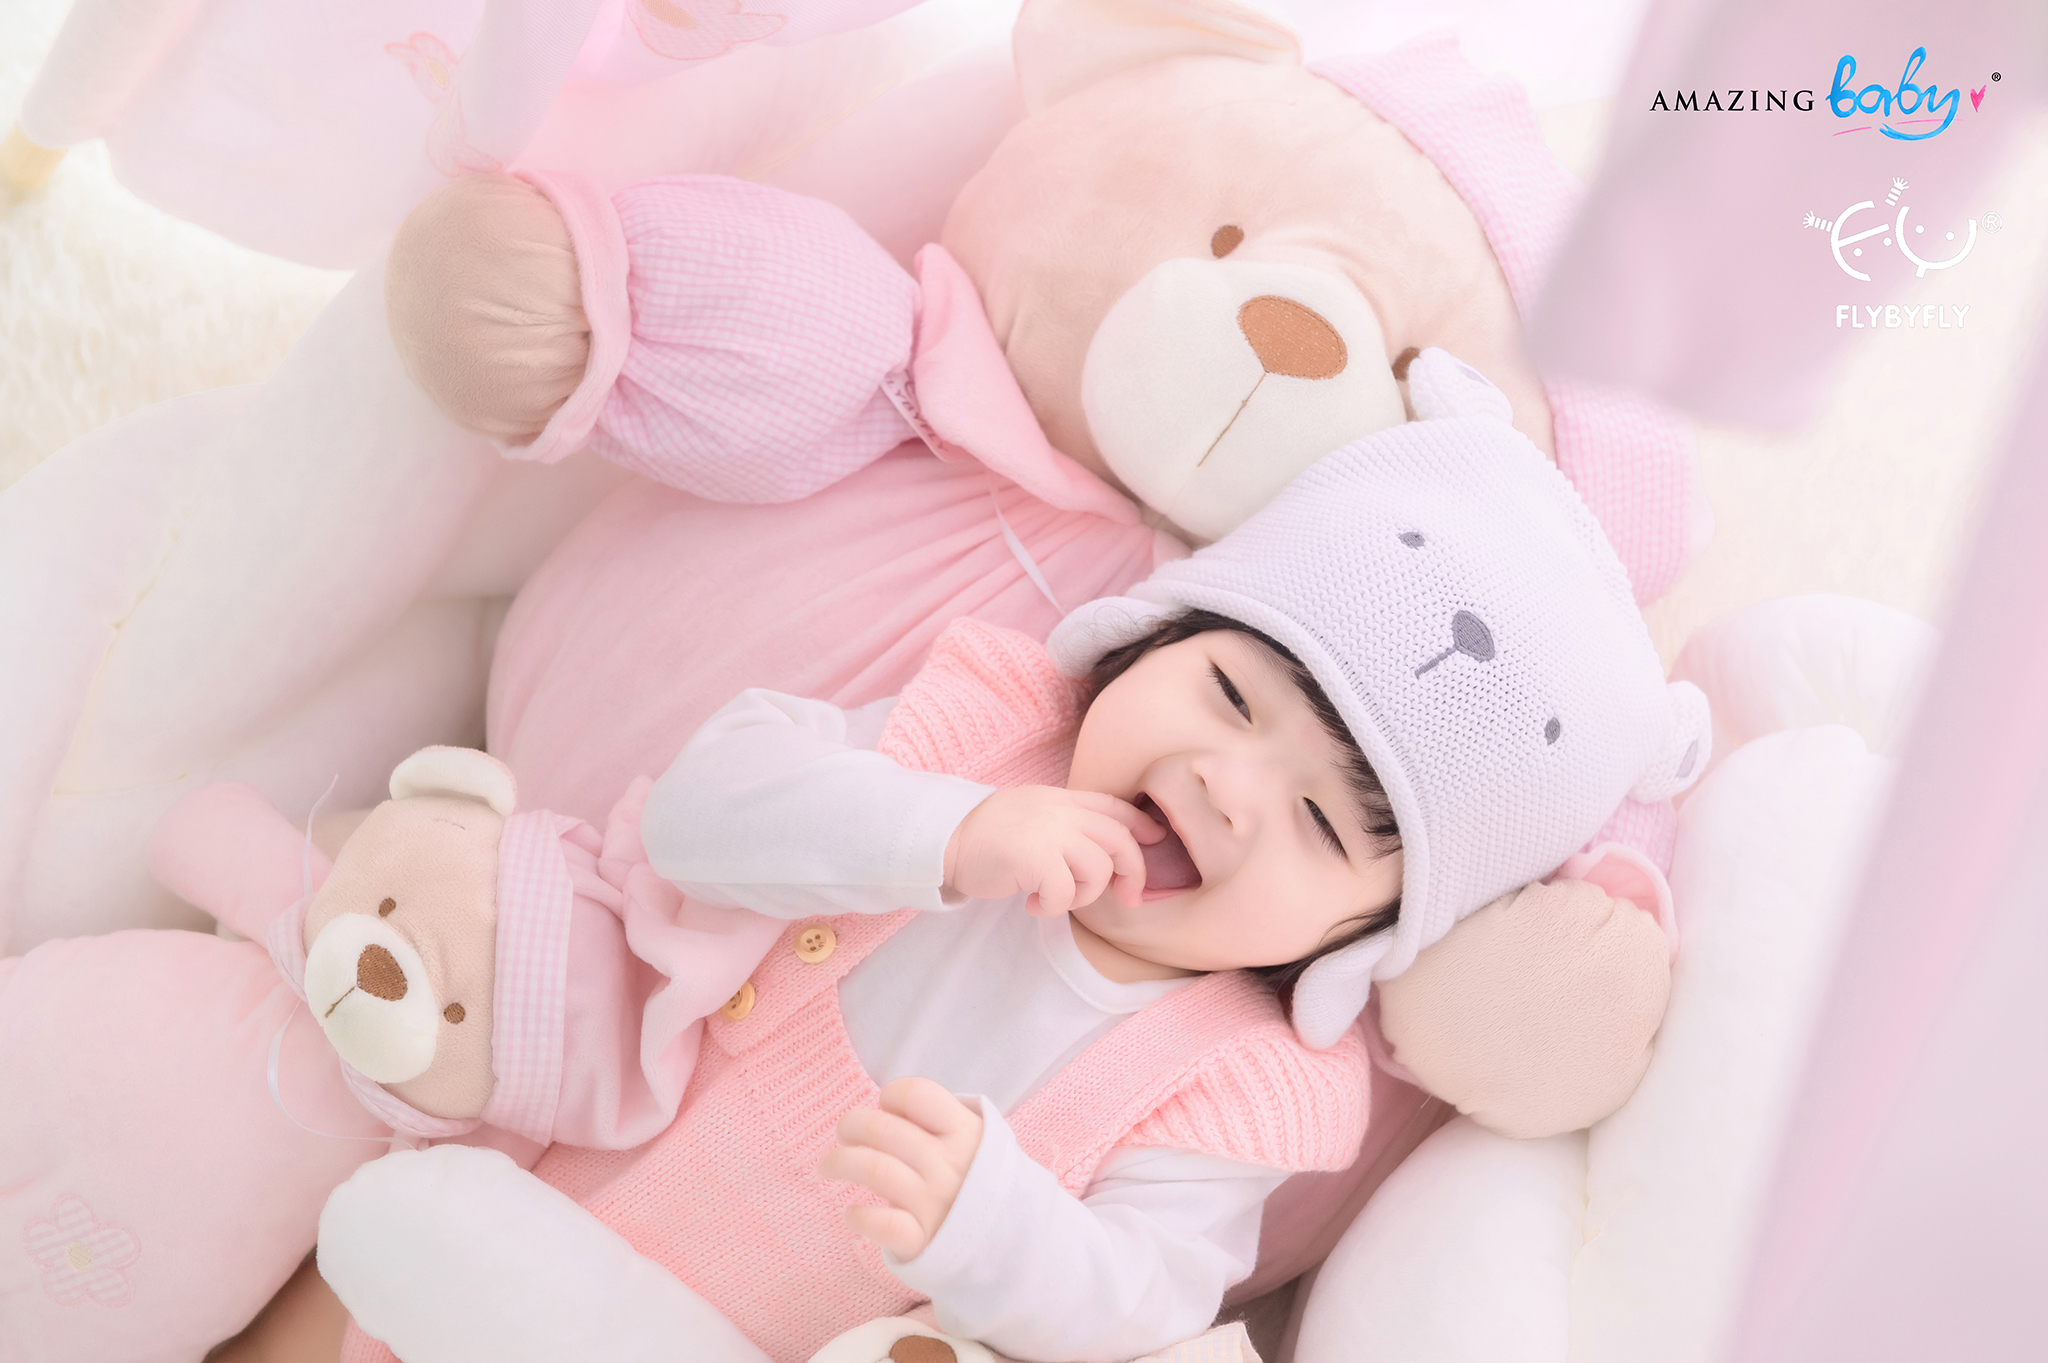 Educational Benefits of Stuffed Animal Toys to Babies, Toddlers, Pre-schoolers and School-aged Children